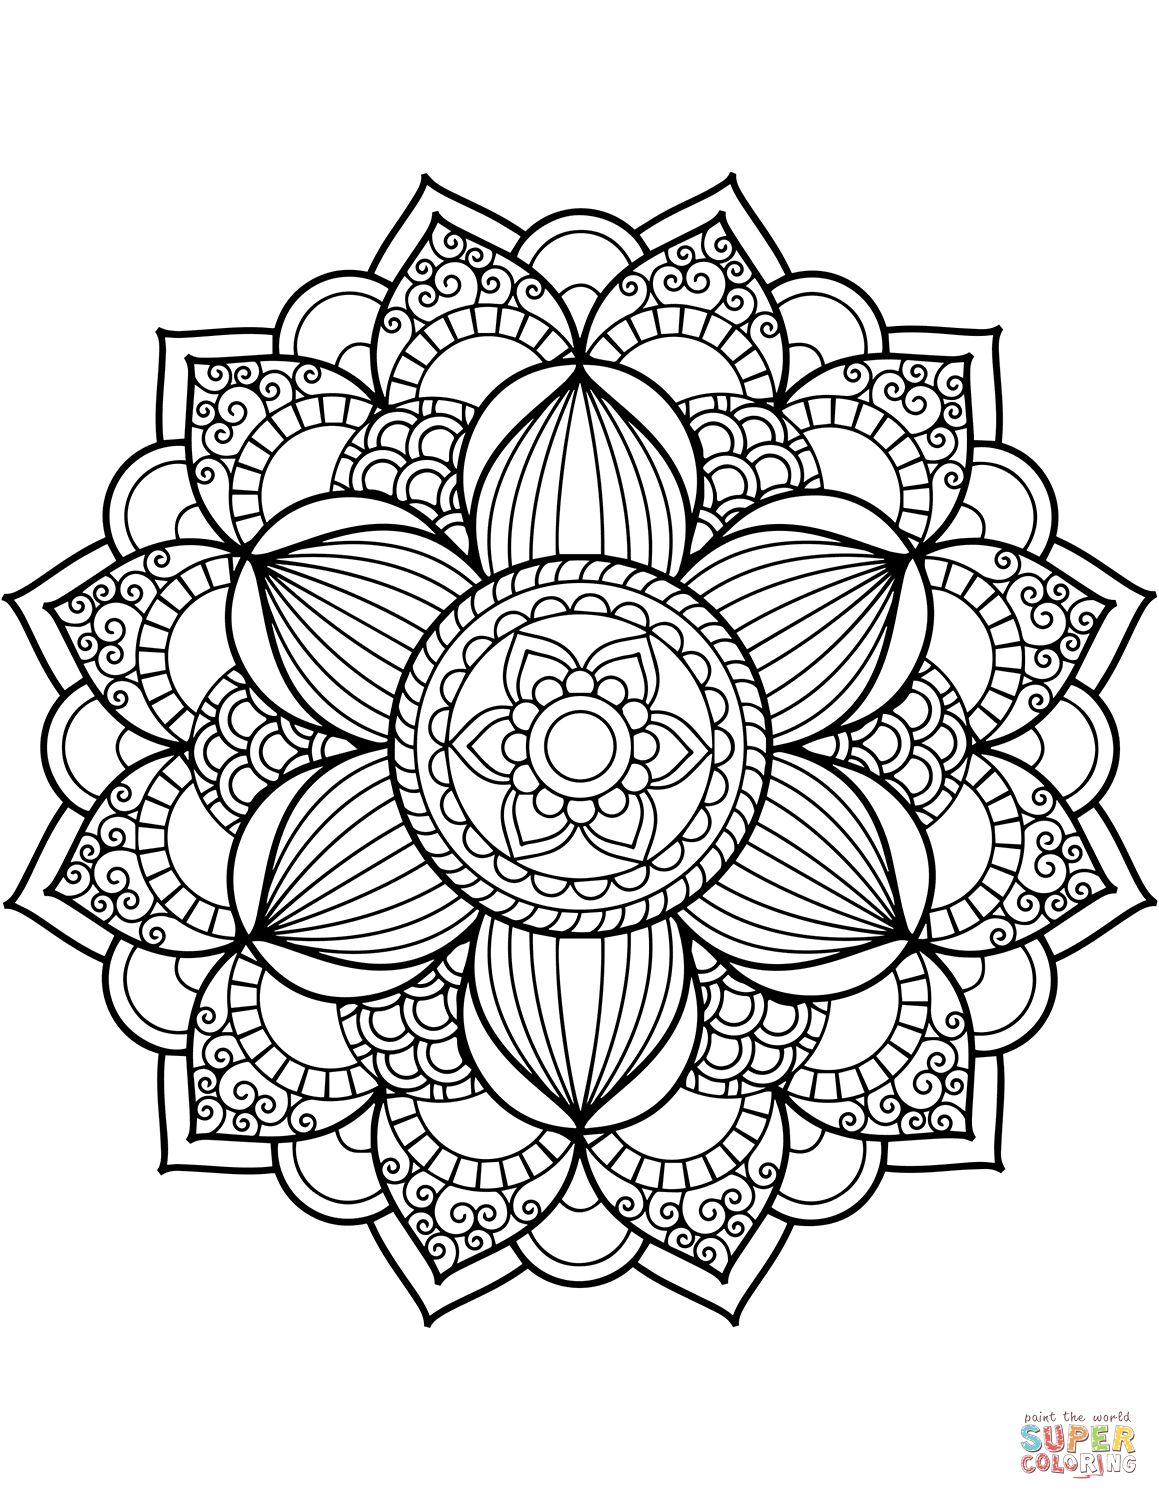 Mandala Coloring Pages Free Online Coloring Coloringandala Pages Pdf Image Inspirations Animal With